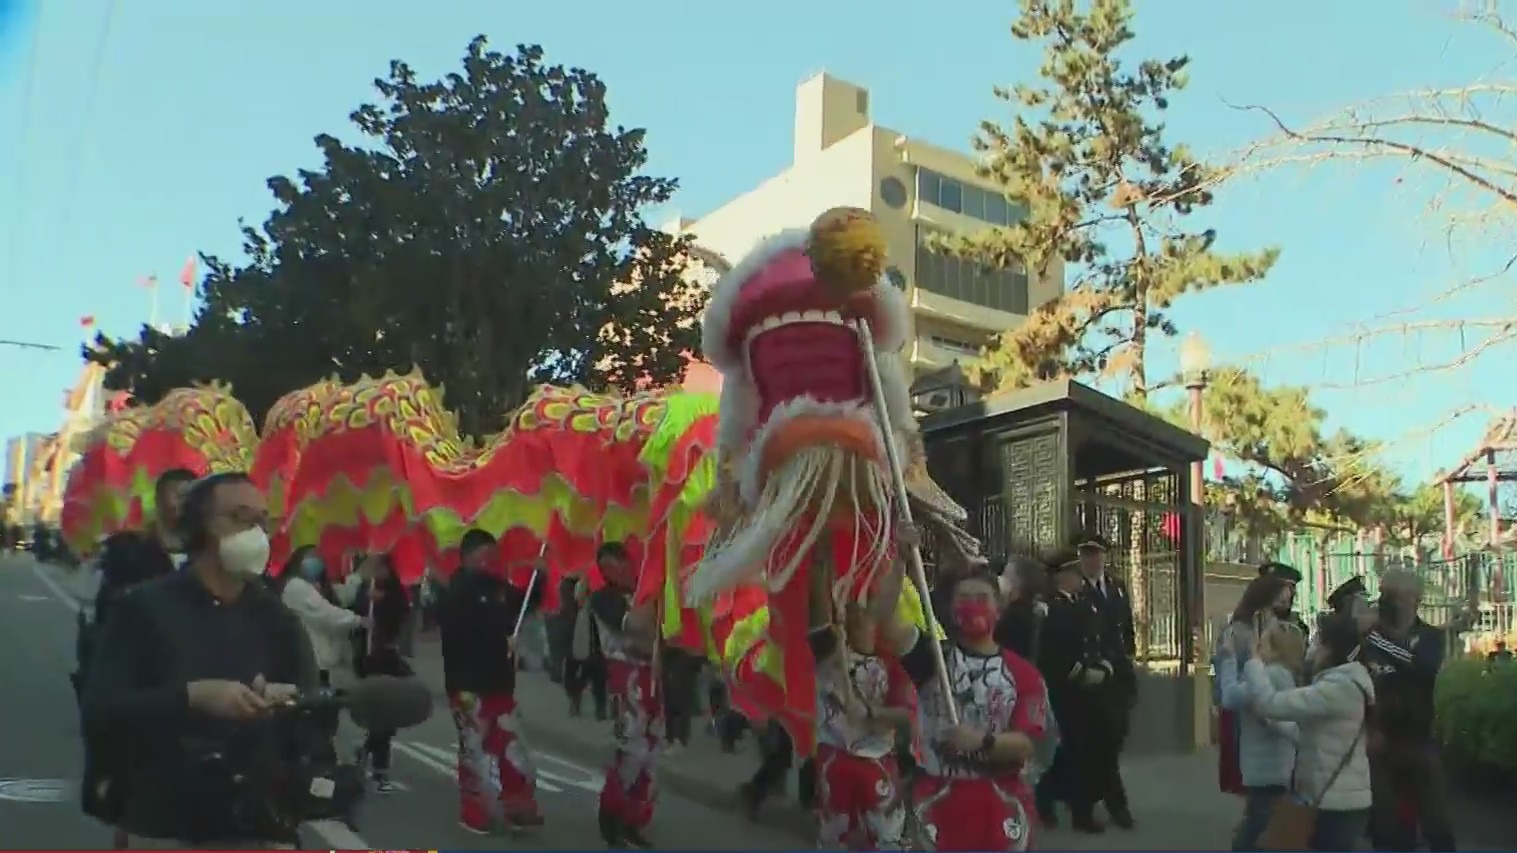 Lunar New Year: Celebrations Begin As San Francisco Set To Apologize To Chinese Community For Past Discrimination